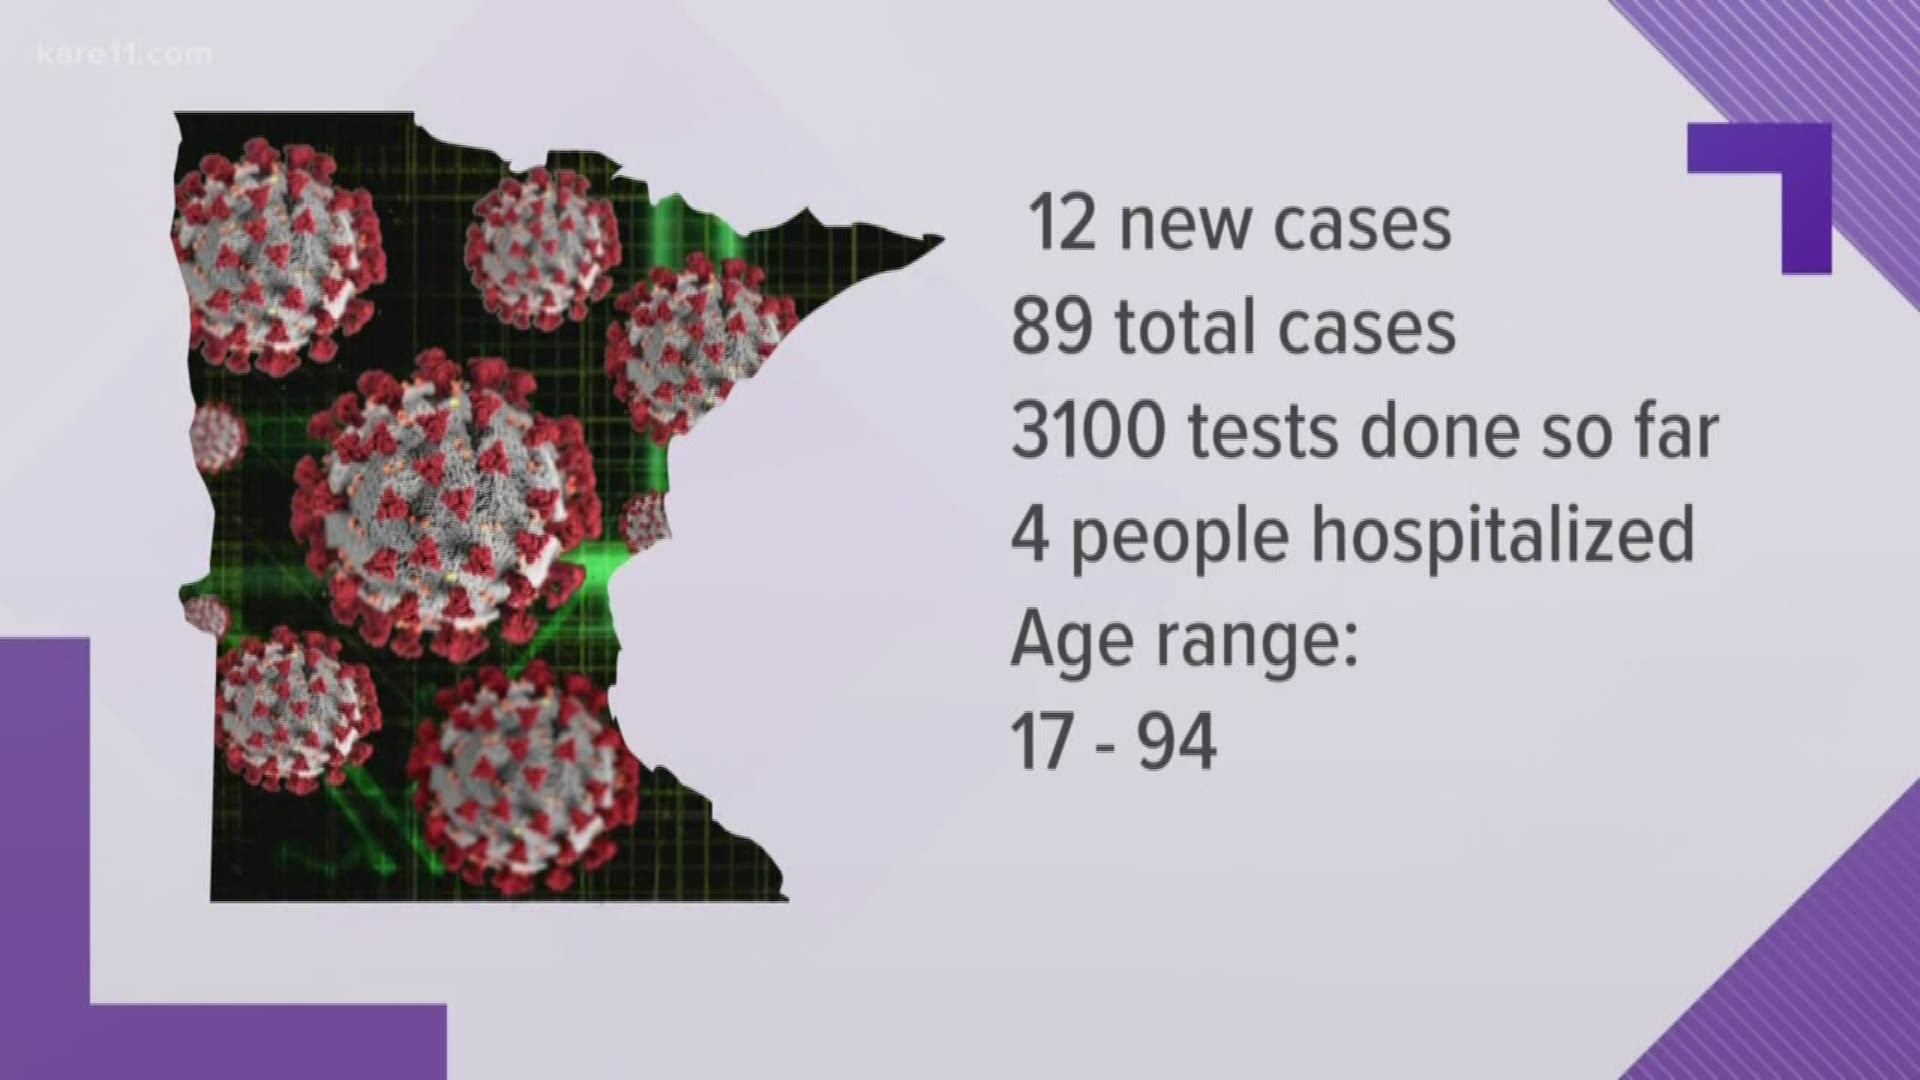 The number of confirmed COVID-19 cases in Minnesota has risen to 89, up 12 from Wednesday.